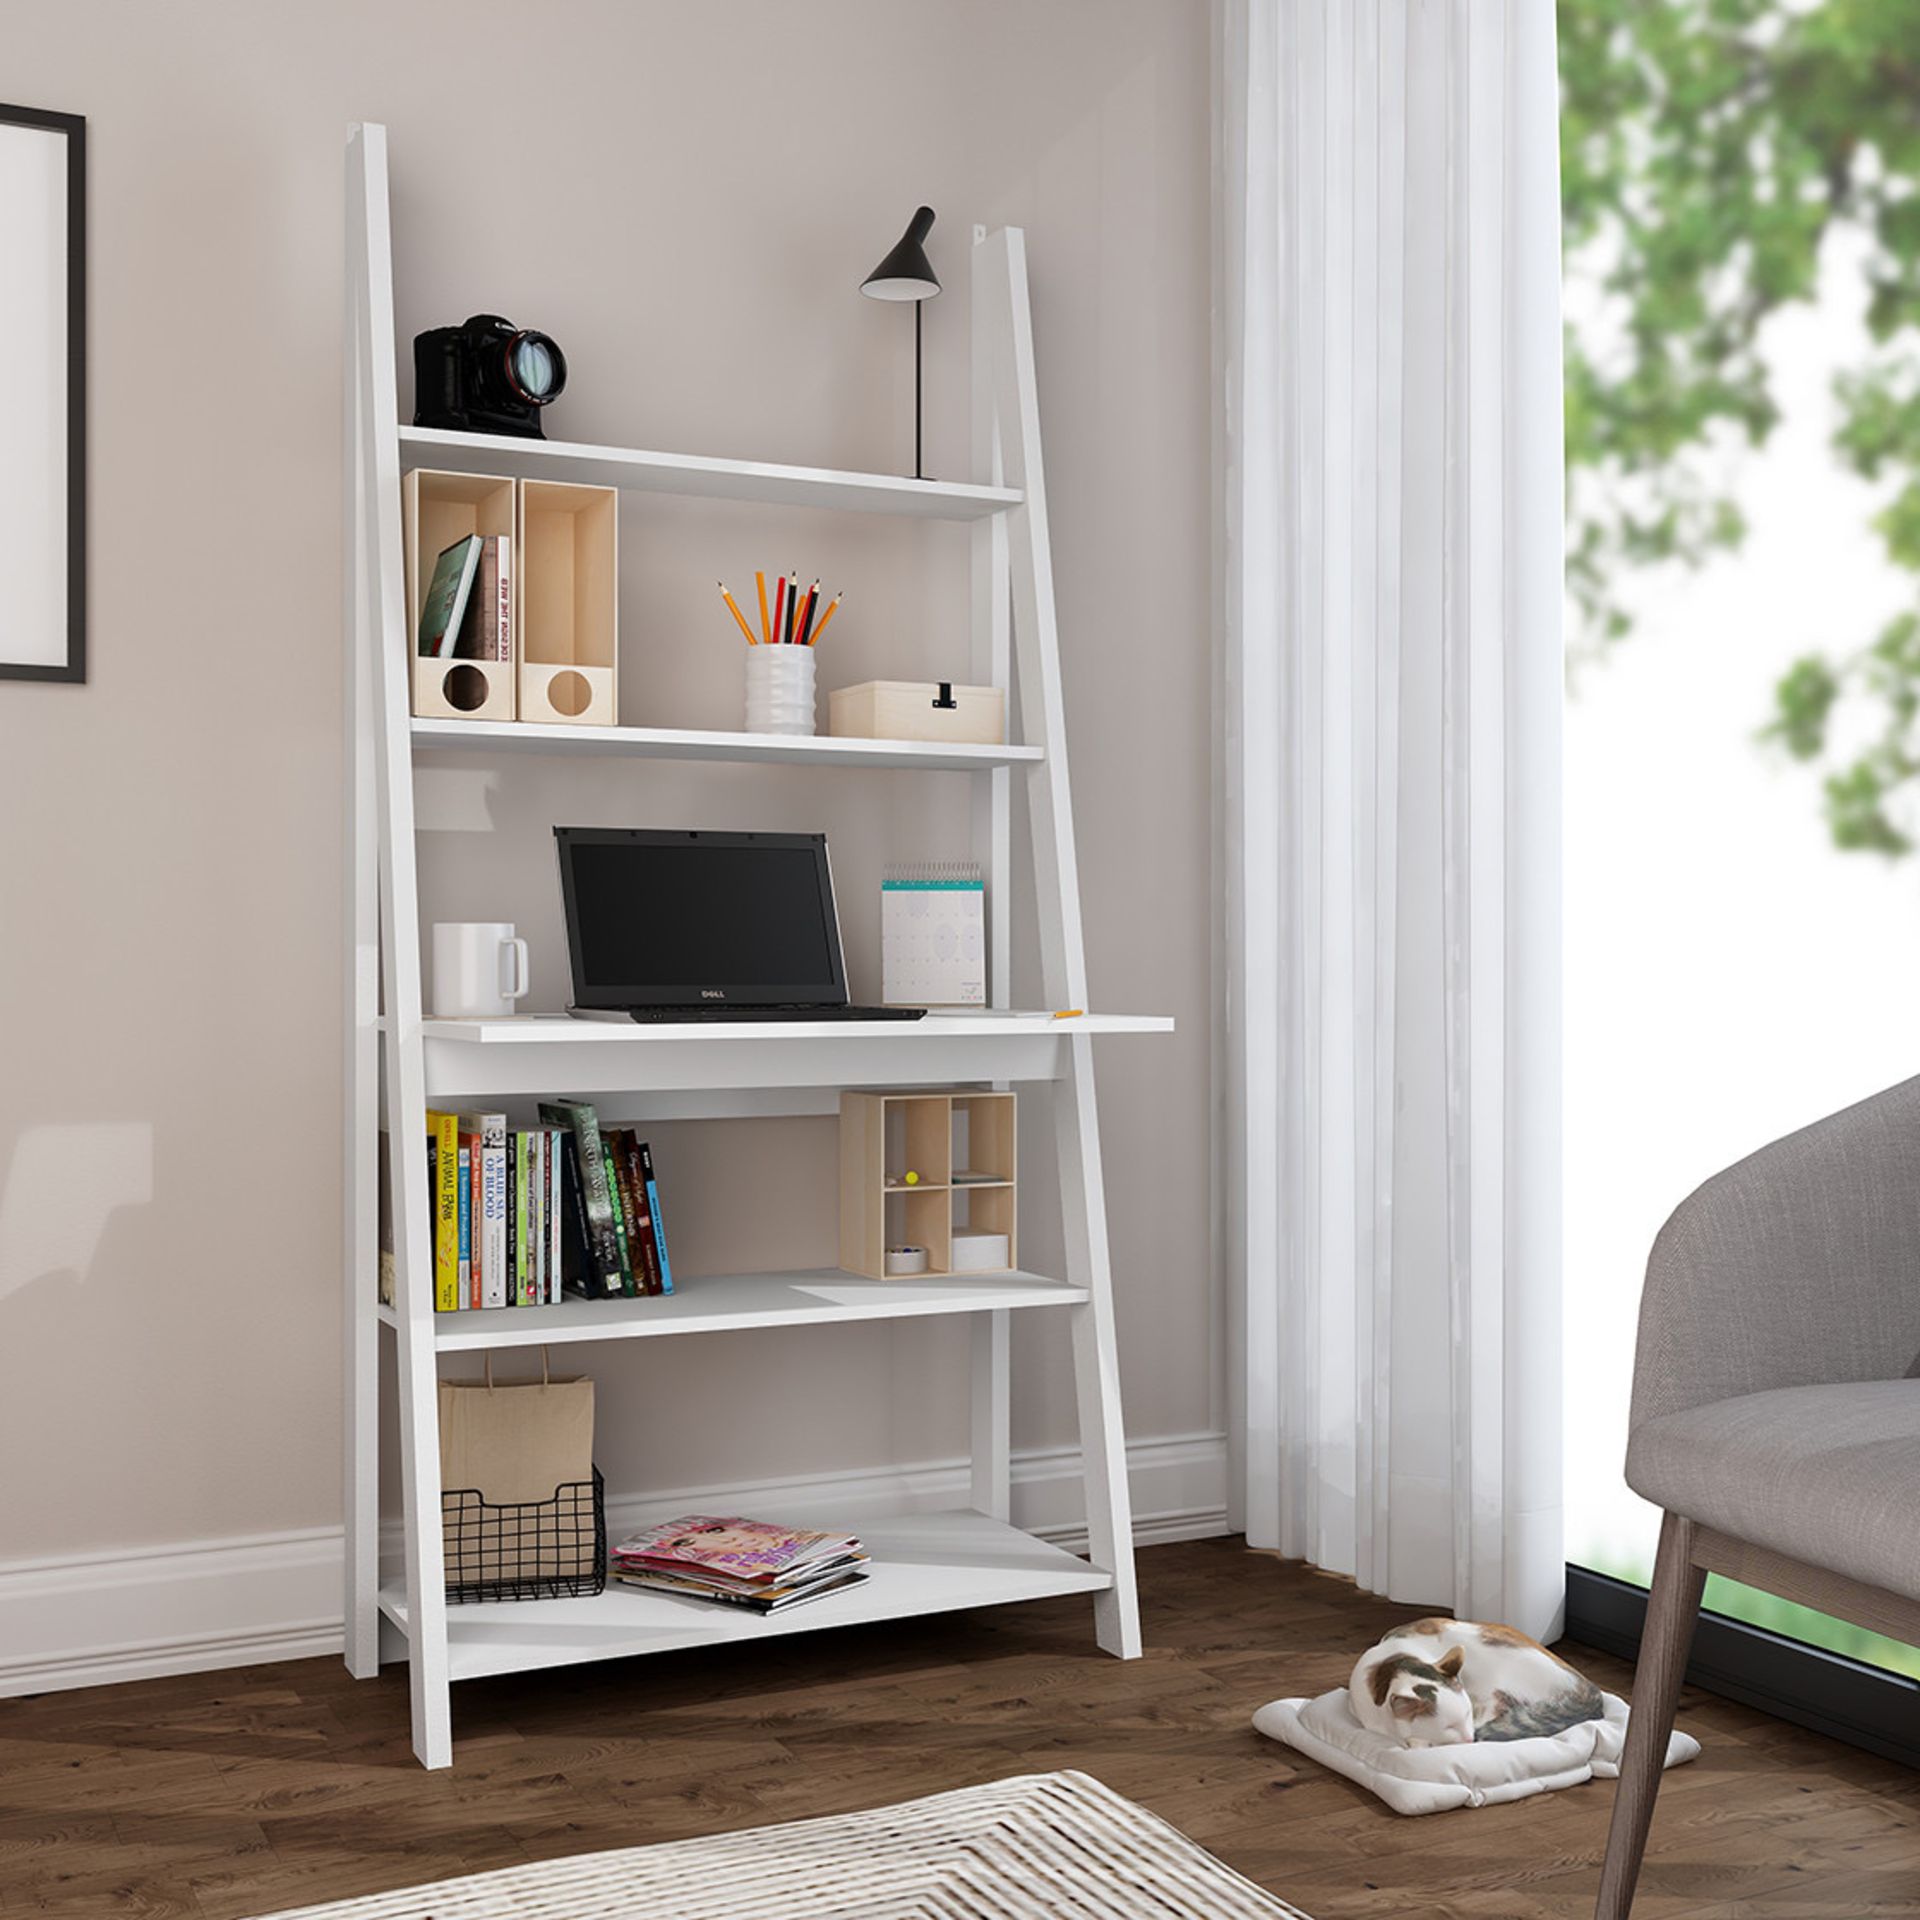 TIVA SHELVING UNIT WITH DESK IN WHITE - RRP £159